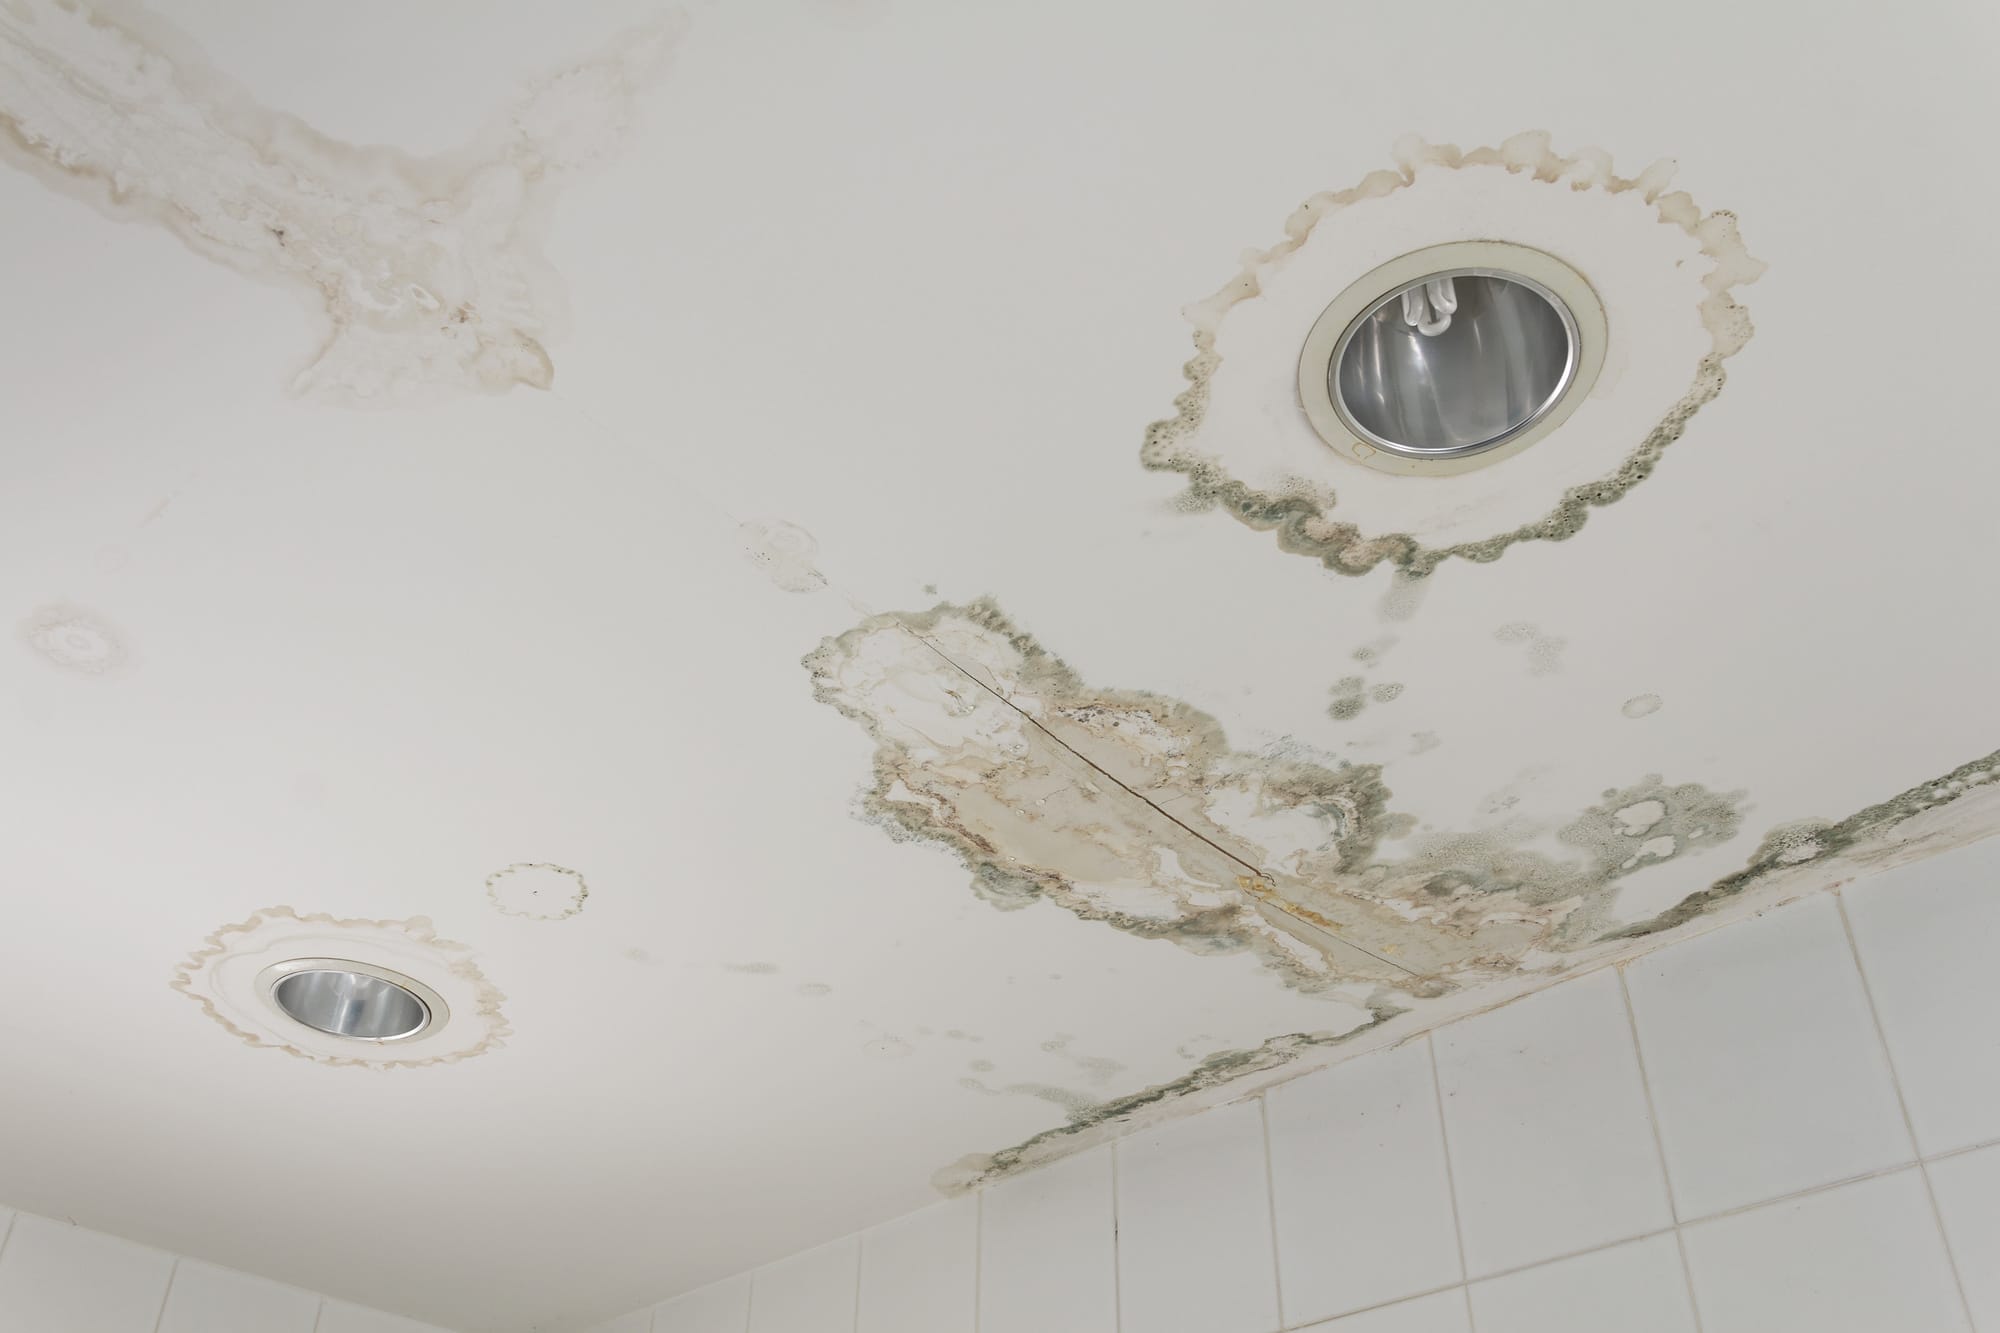 How to Check for Bathroom Leaks